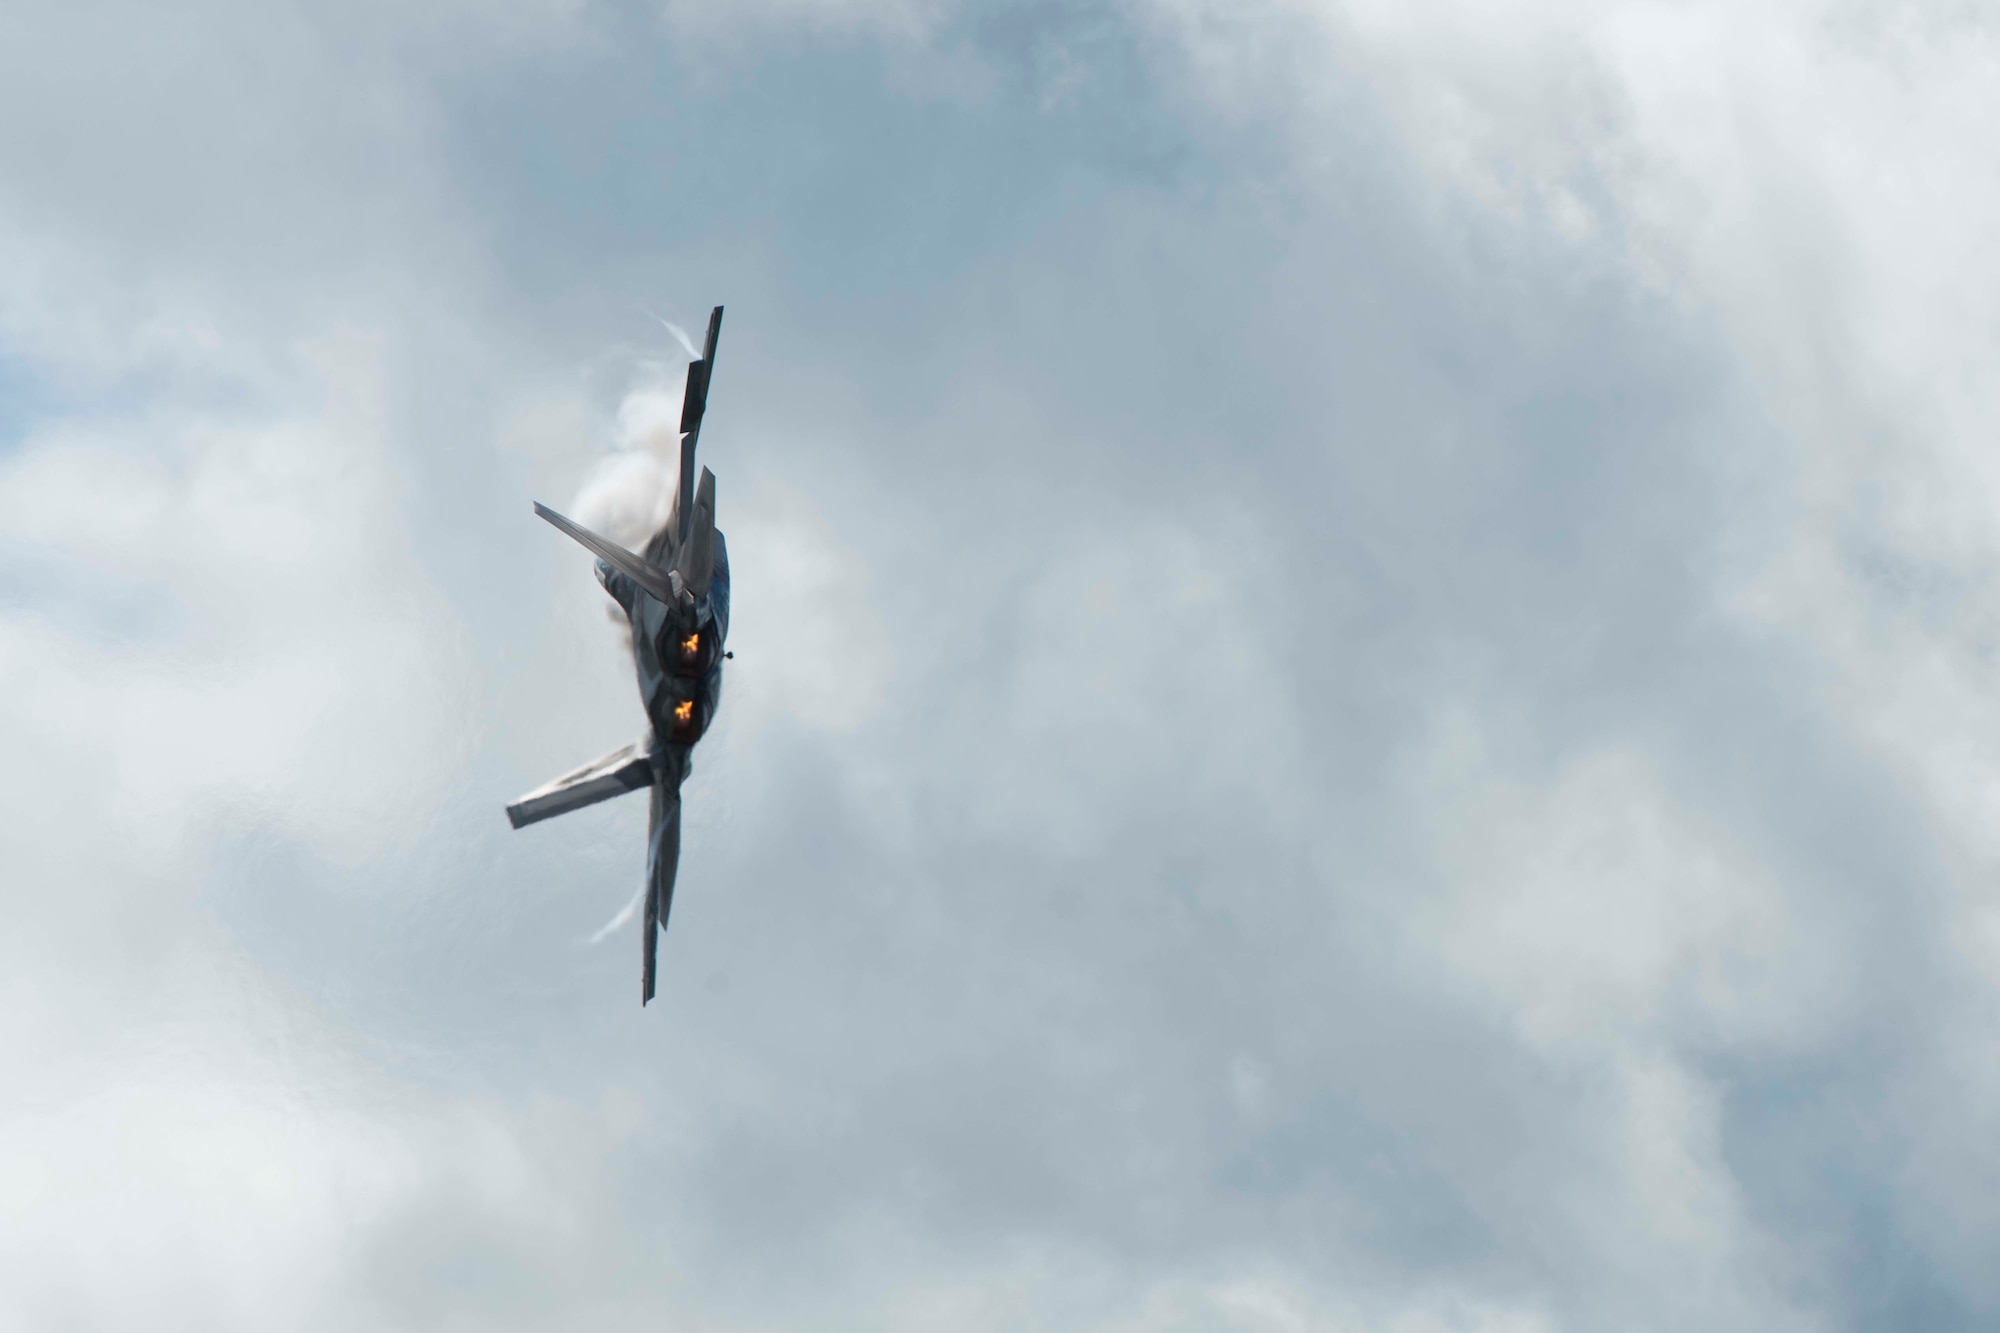 U.S. Air Force Airmen from the F-22 Raptor Demonstration Team, based out of Joint Base Langley-Eustis, Virginia, performed at the Cold Lake Air Show at Canadian Forces Base Cold Lake, Canada, July 21-22.